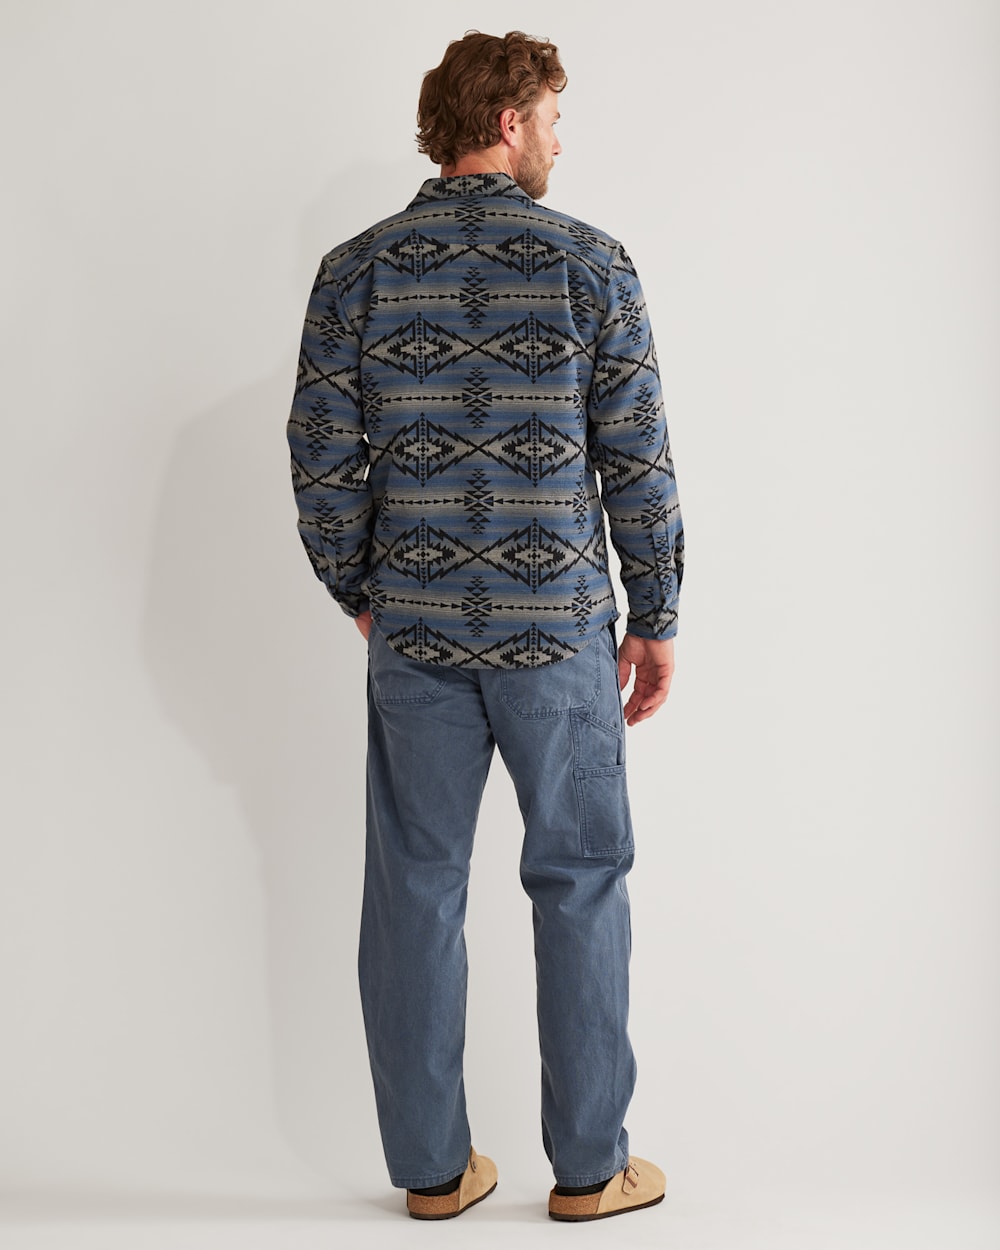 ALTERNATE VIEW OF MEN'S MARSHALL DOUBLESOFT SHIRT IN TRAPPER PEAK BLUE/GREY image number 4